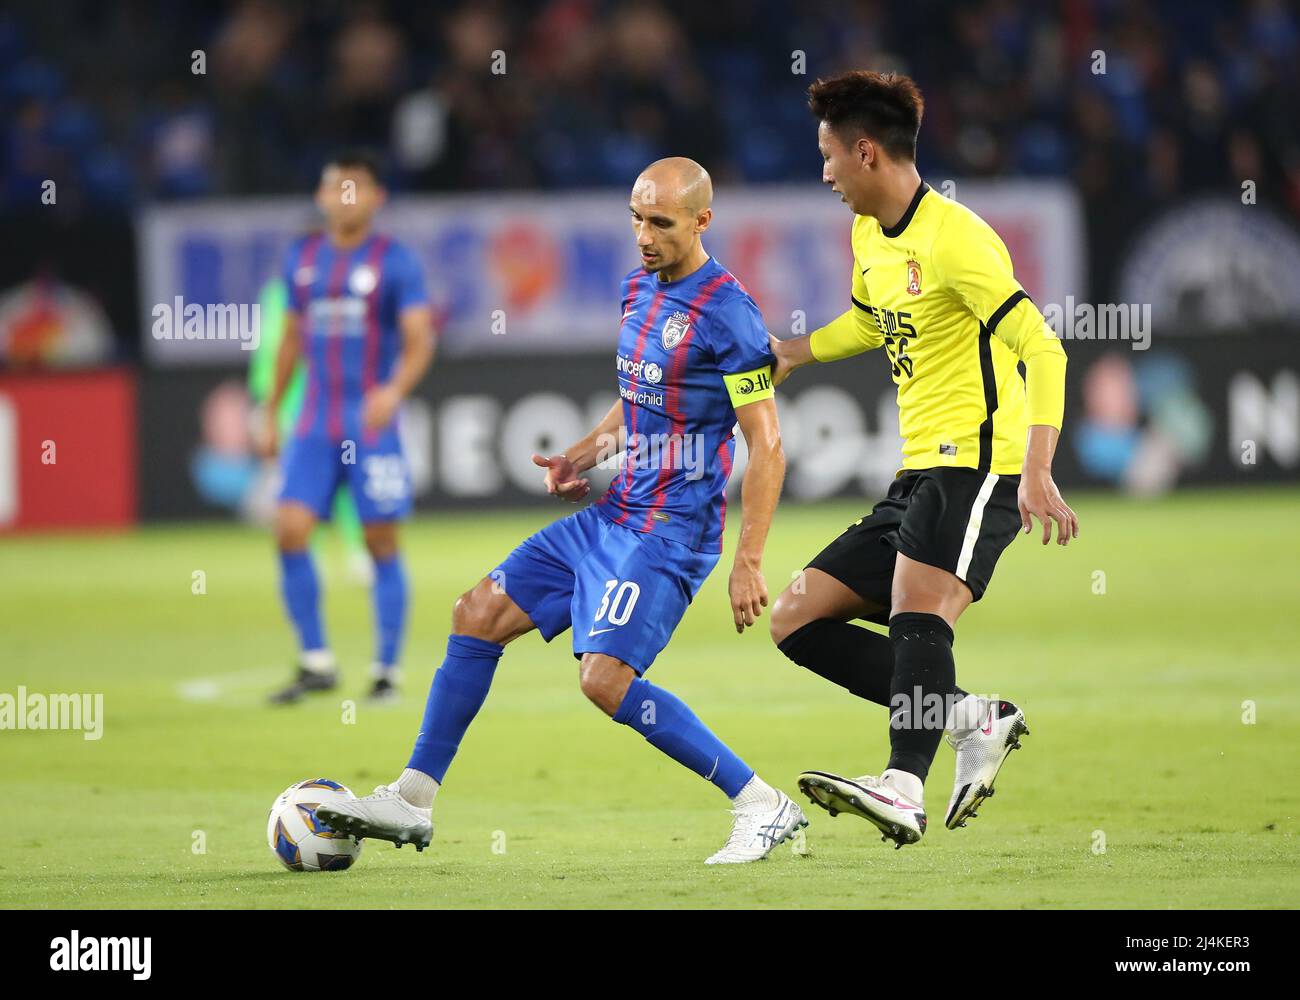 Leandro Velazquez of Johor Darul Ta'zim (L) and He Shaolin of Guangzhou Evergrande are seen in action during the AFC Champions League Group I match between Guangzhou Evergrande and Johor Darul Ta'zim at the Sultan Ibrahim Stadium.(Final score; Guangzhou Evergrande 0:5 Johor Darul Ta'zim) Stock Photo